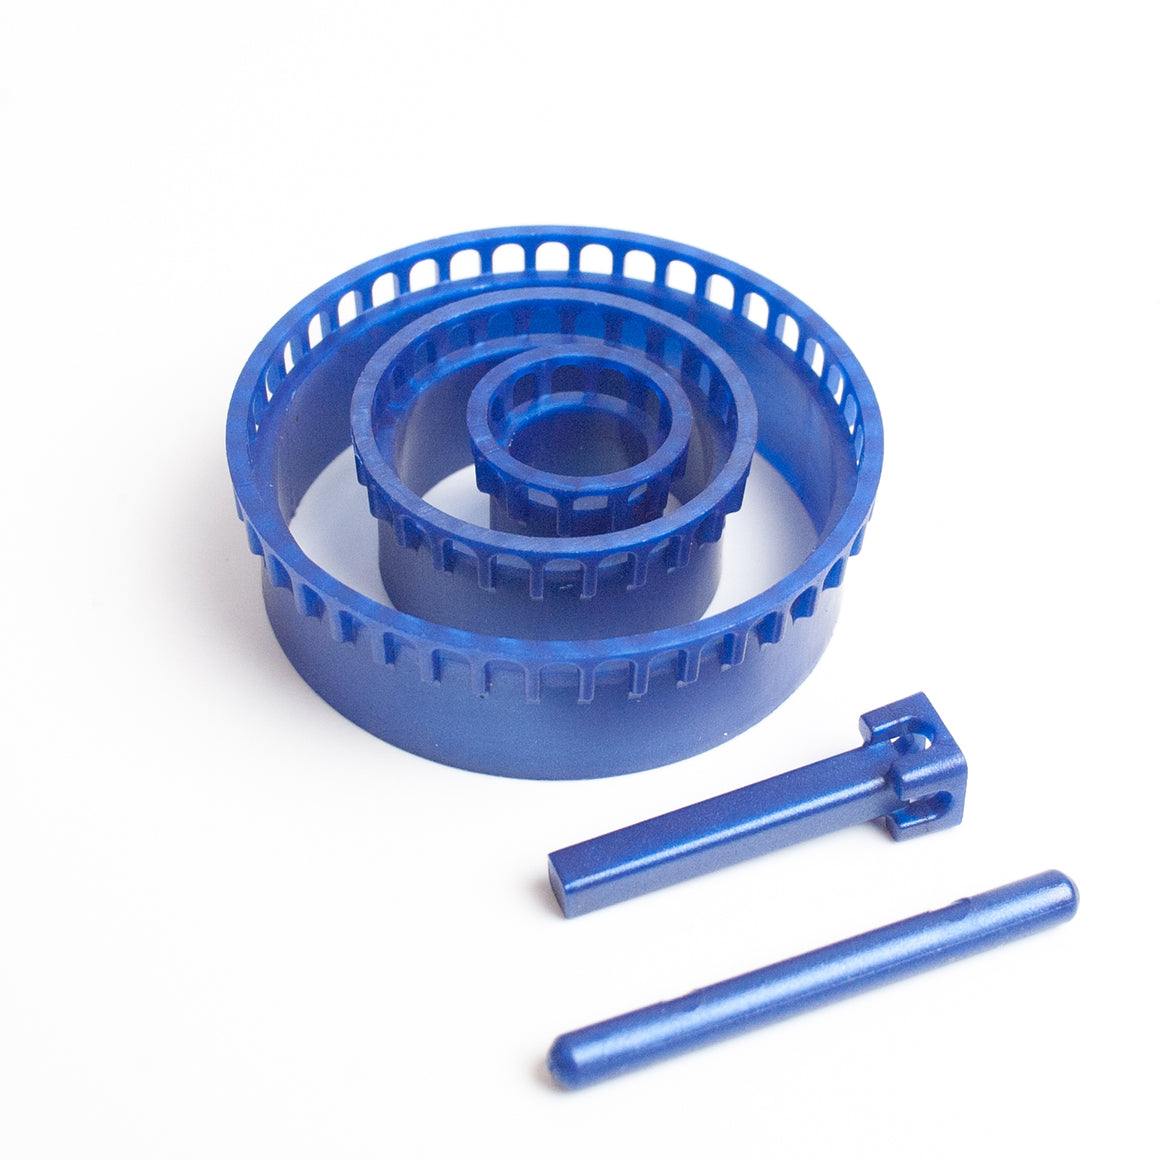 BLUE  Wire crochet looms set, ISK invisible spool knitting starter set , Wire work loom - Yooladesign